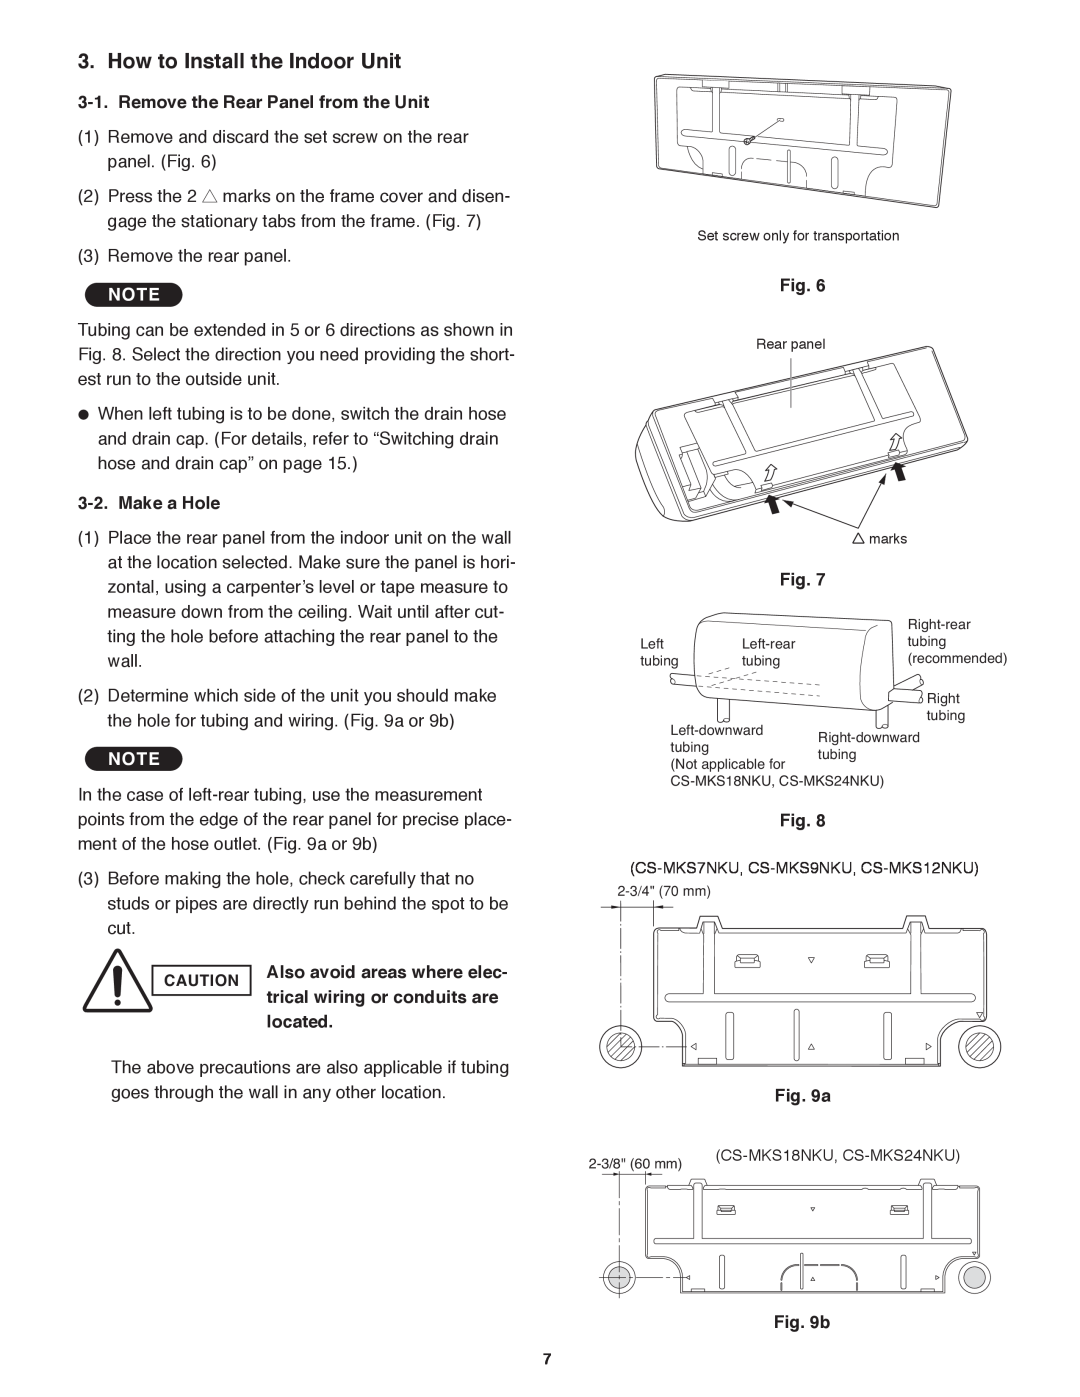 Panasonic CS-MKS9NKU How to Install the Indoor Unit, Remove the Rear Panel from the Unit, Make a Hole, located, b 